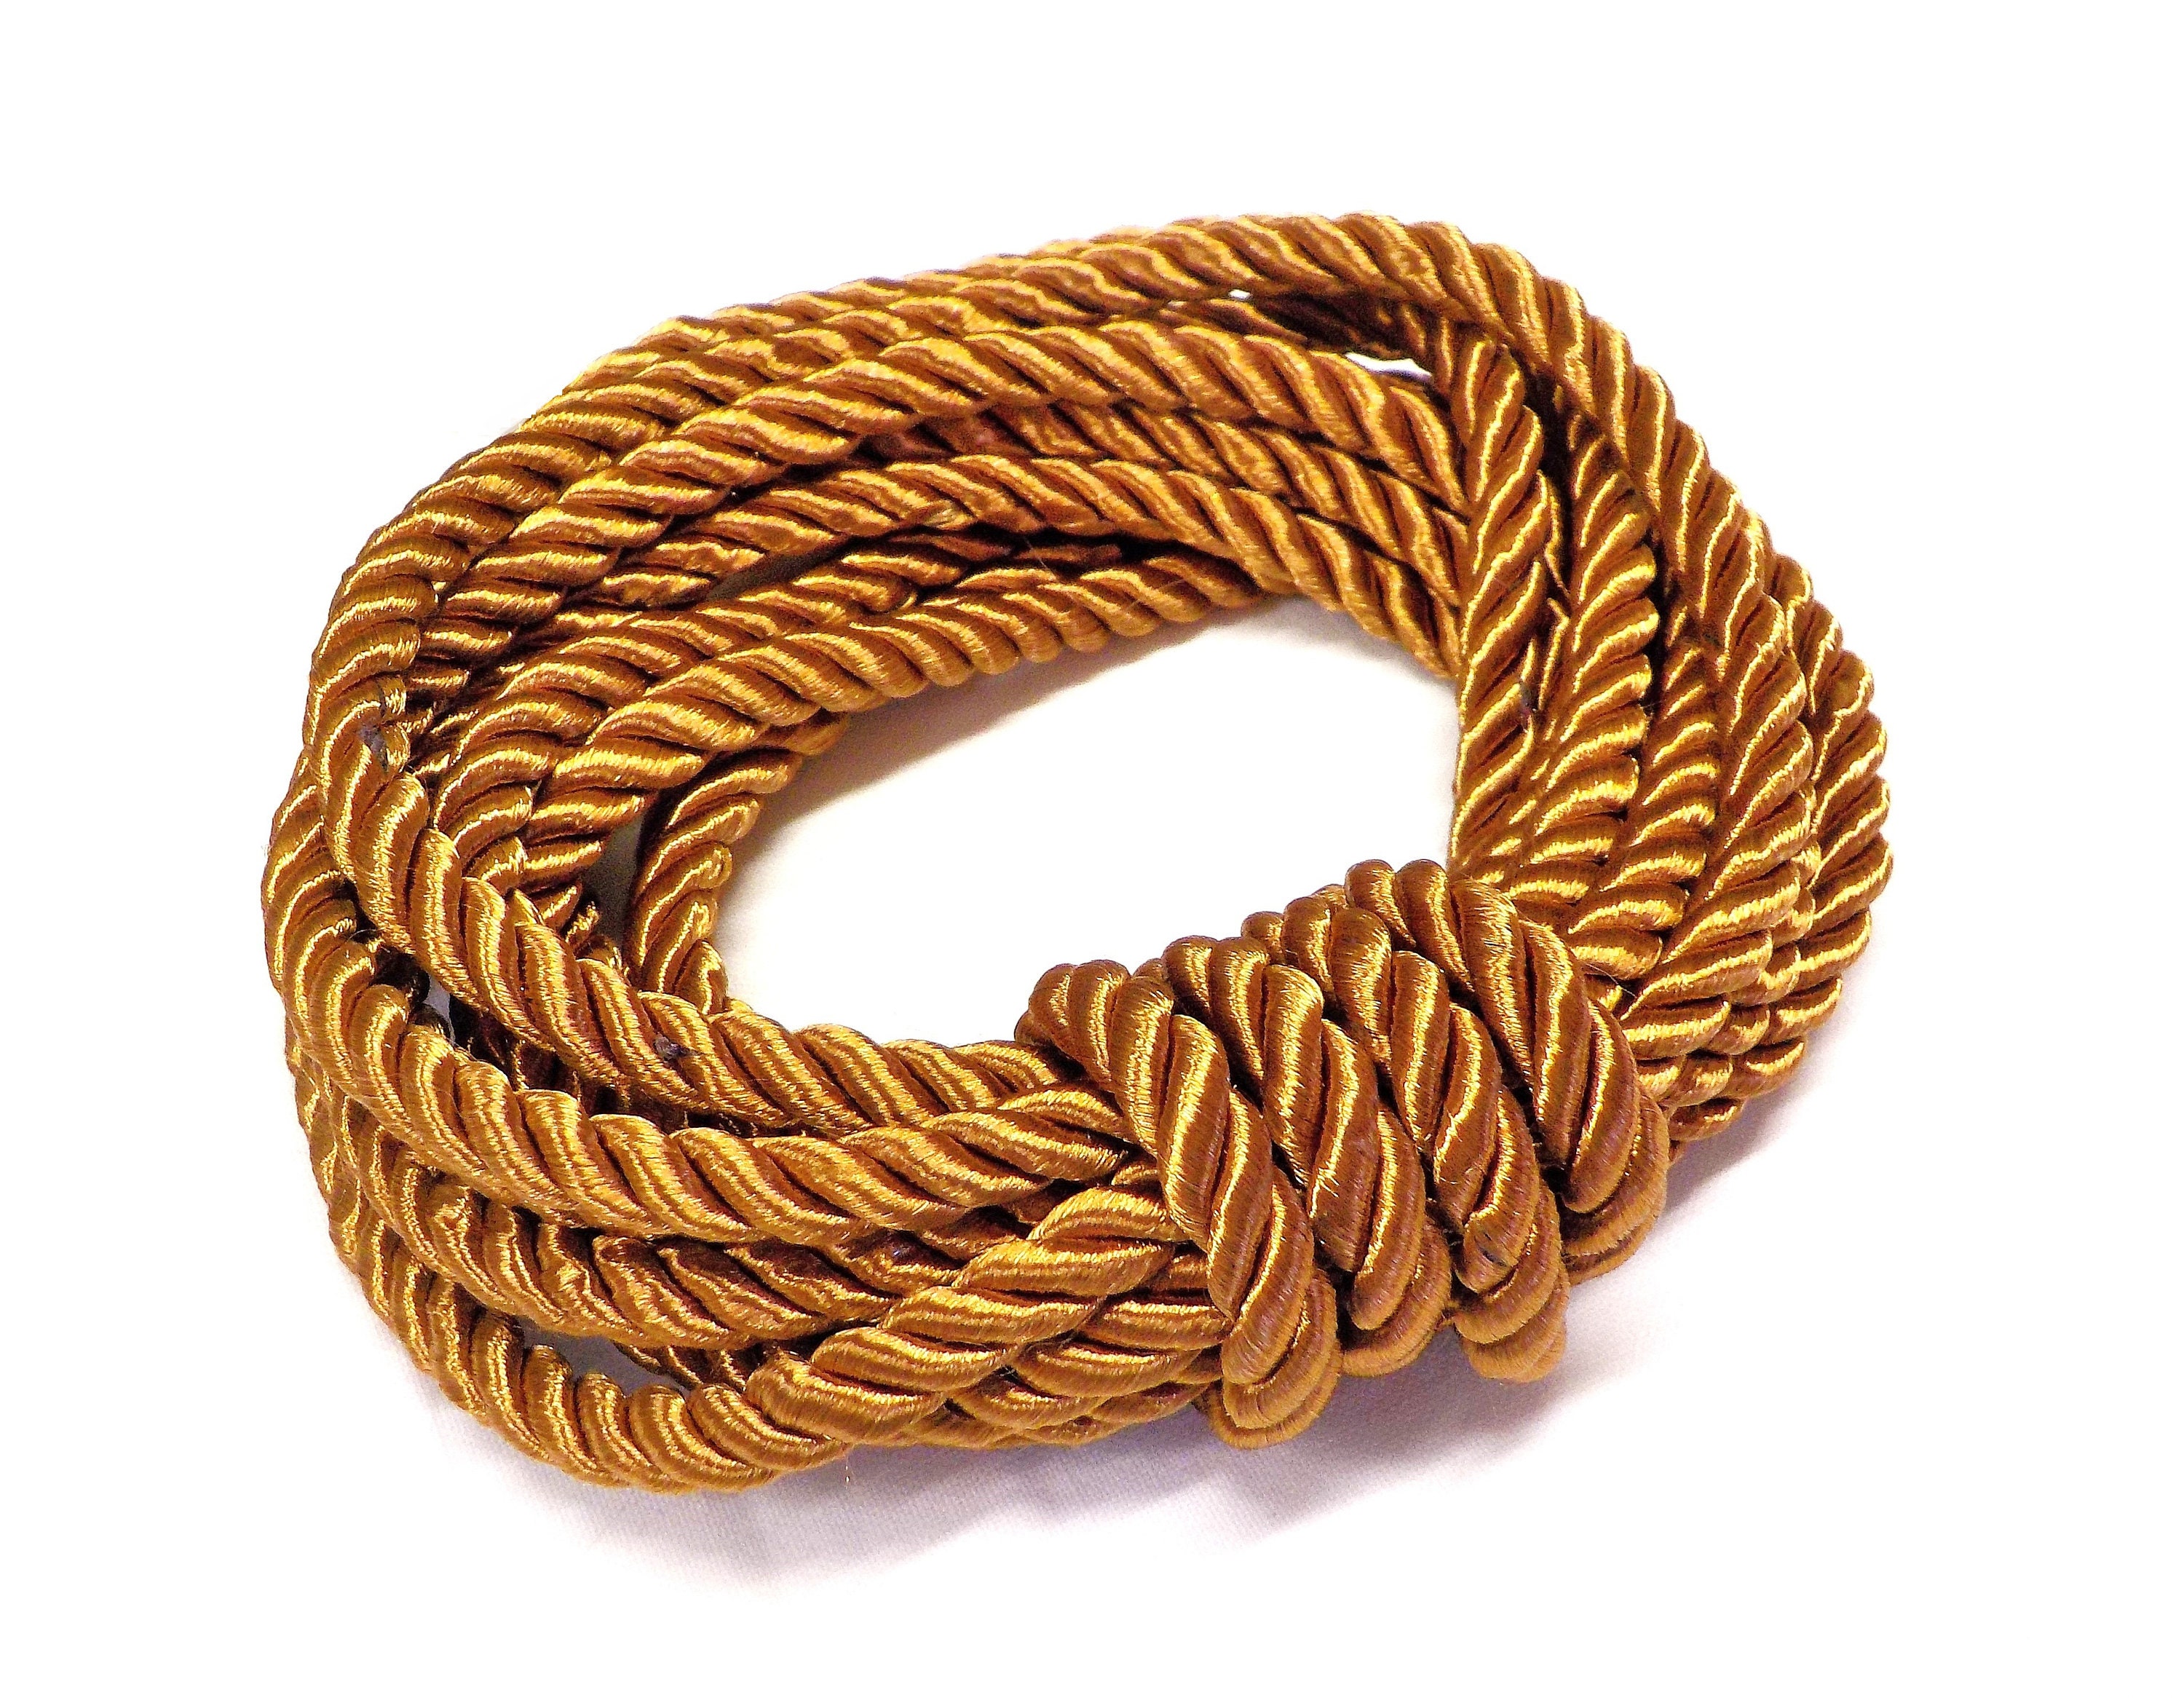 Buy 5mm Light Brown Satin Twisted Cord, Wrapped Thread Cord, Rope Cord 2  Yards/ 1,84m Approx. 1 Piece Online in India 